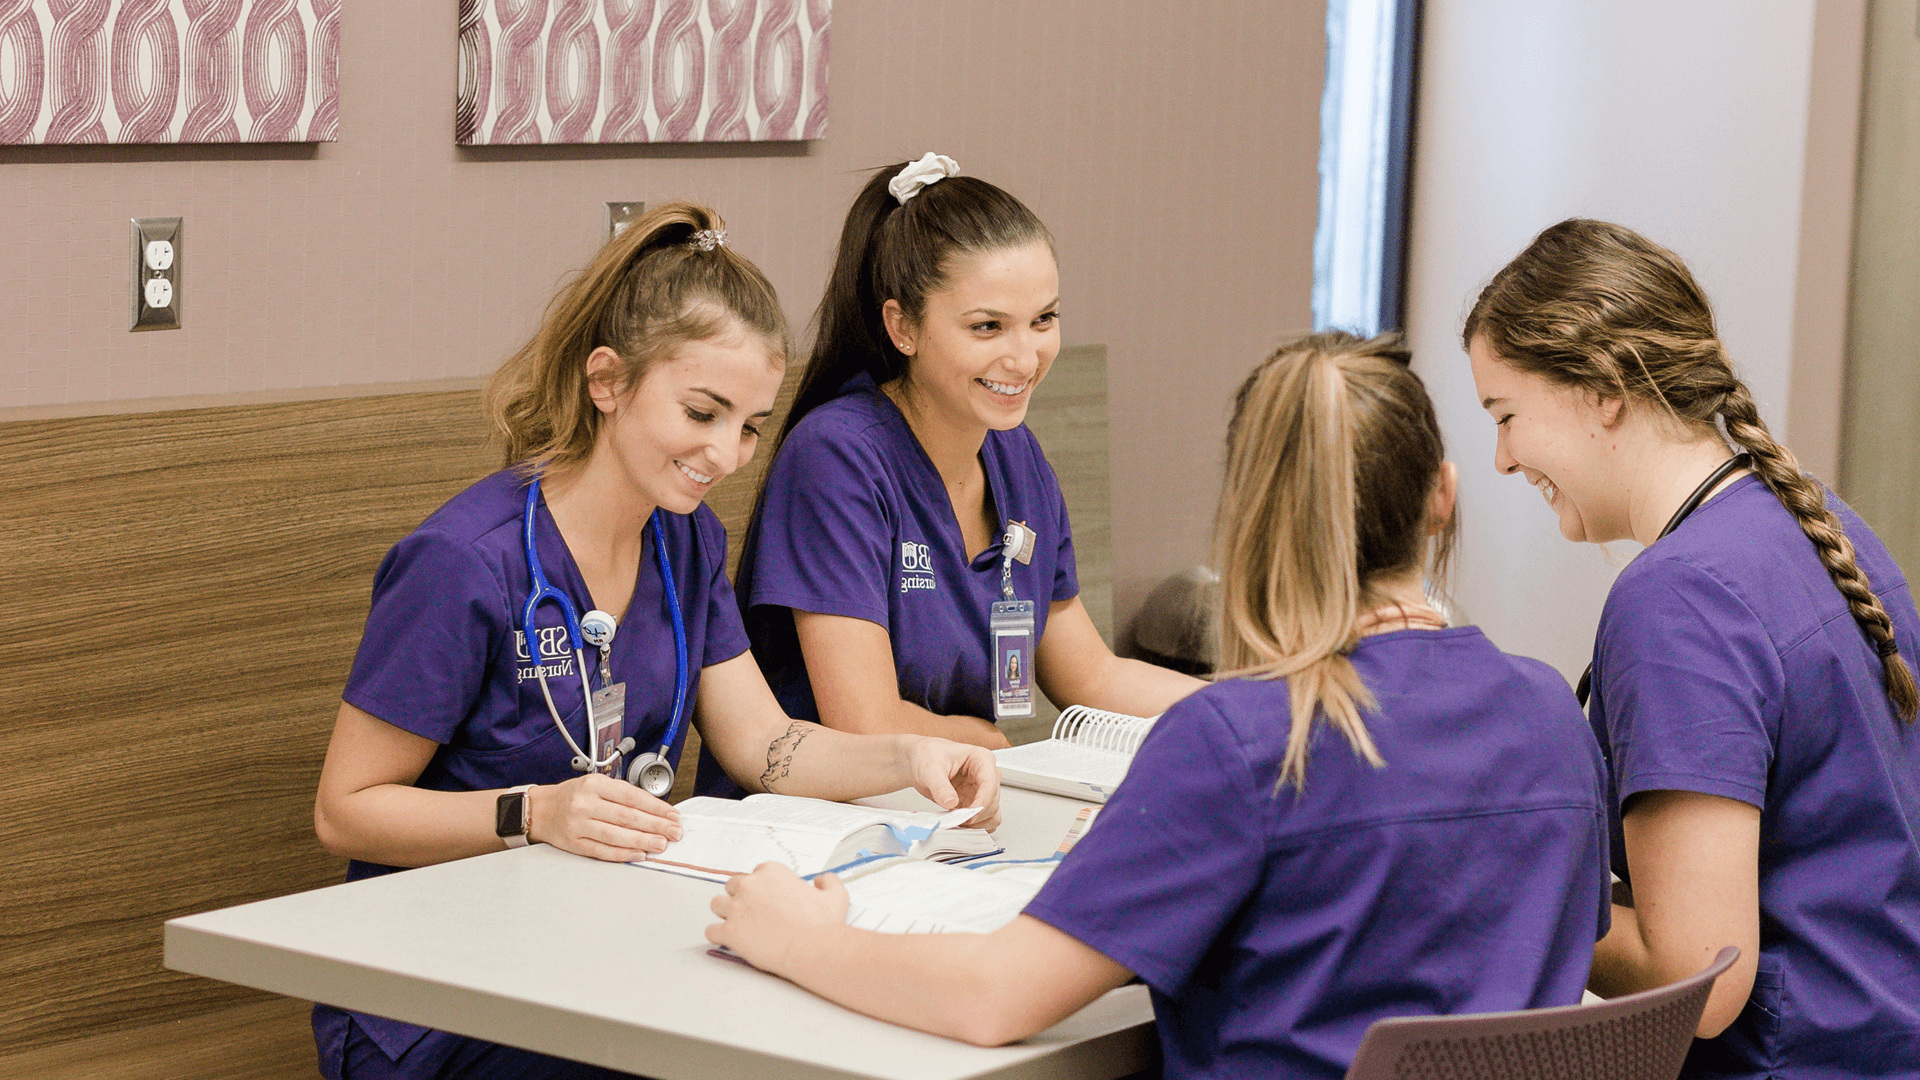 four girls wearing purple scrubs smile and laugh as they sit at a table studying together